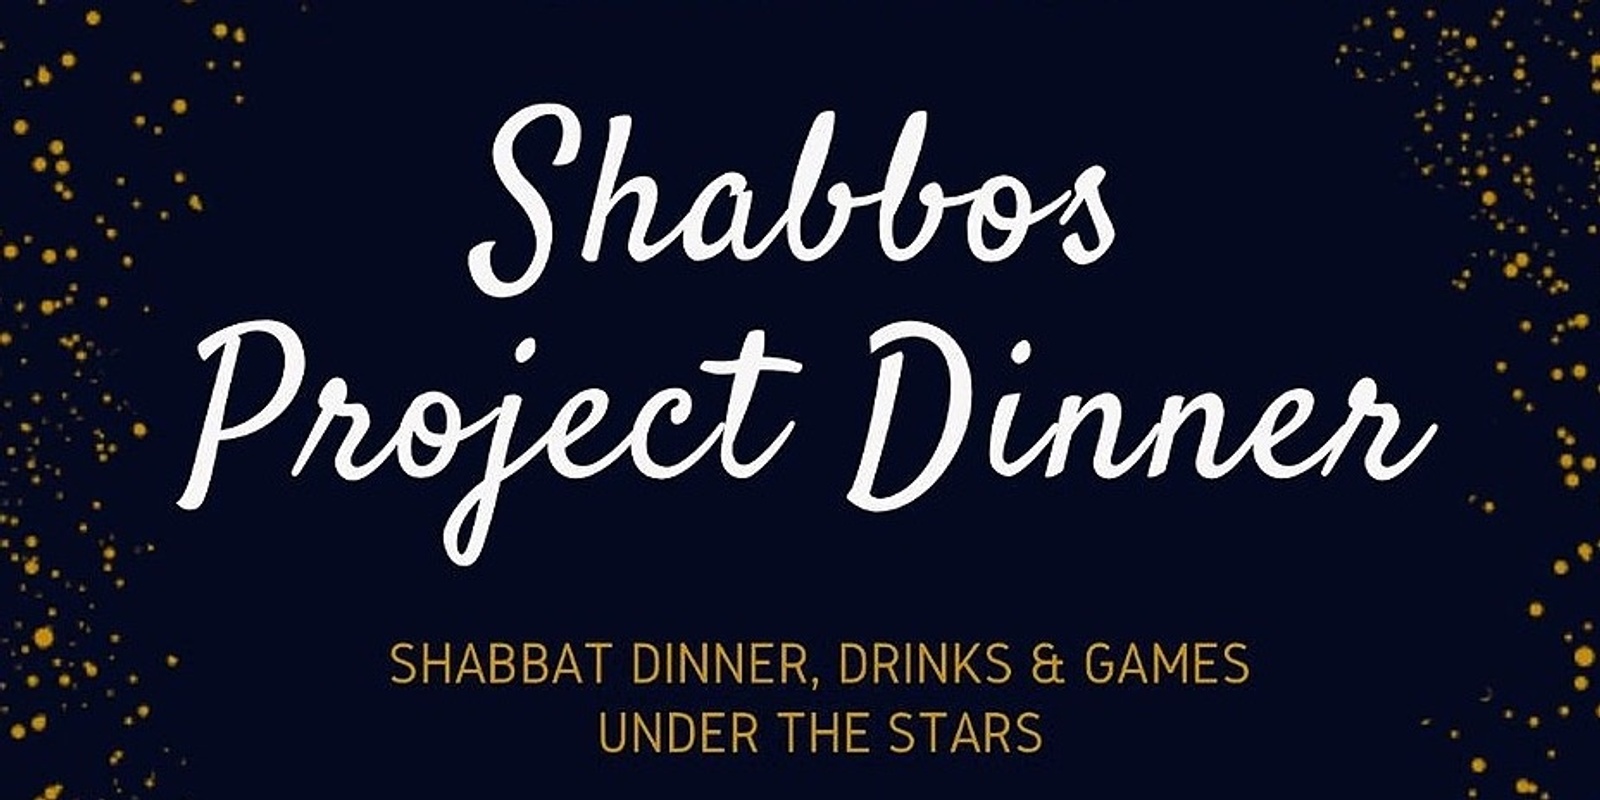 Banner image for Shabbas Project Dinner 2019!